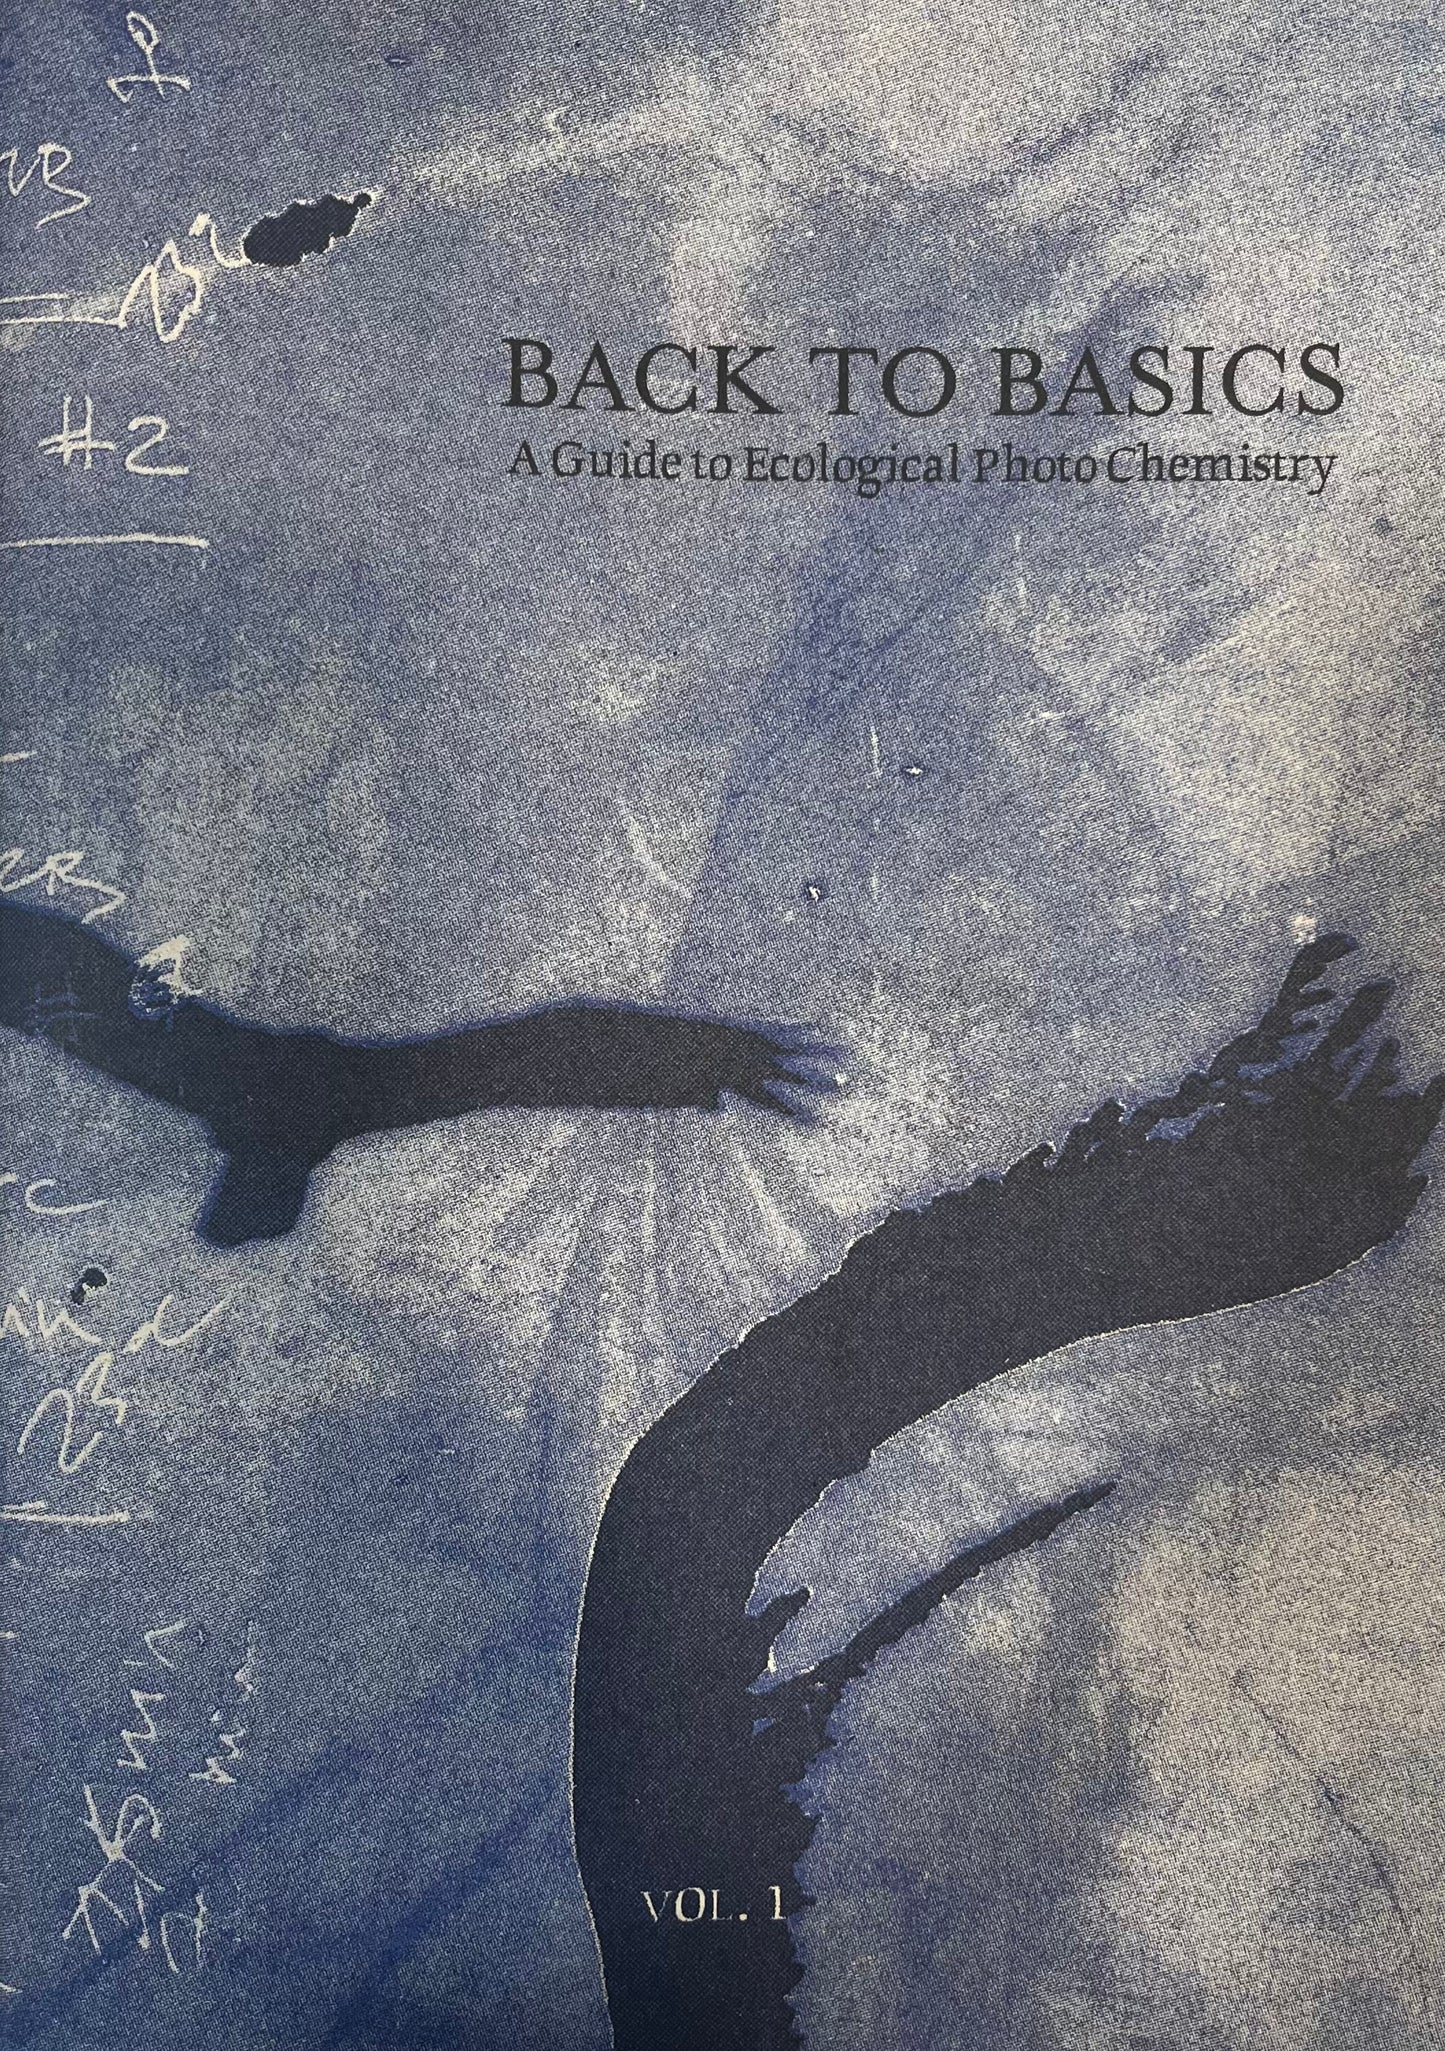 Back to Basics - A Guide to Ecological Photo Chemistry - Vol 1